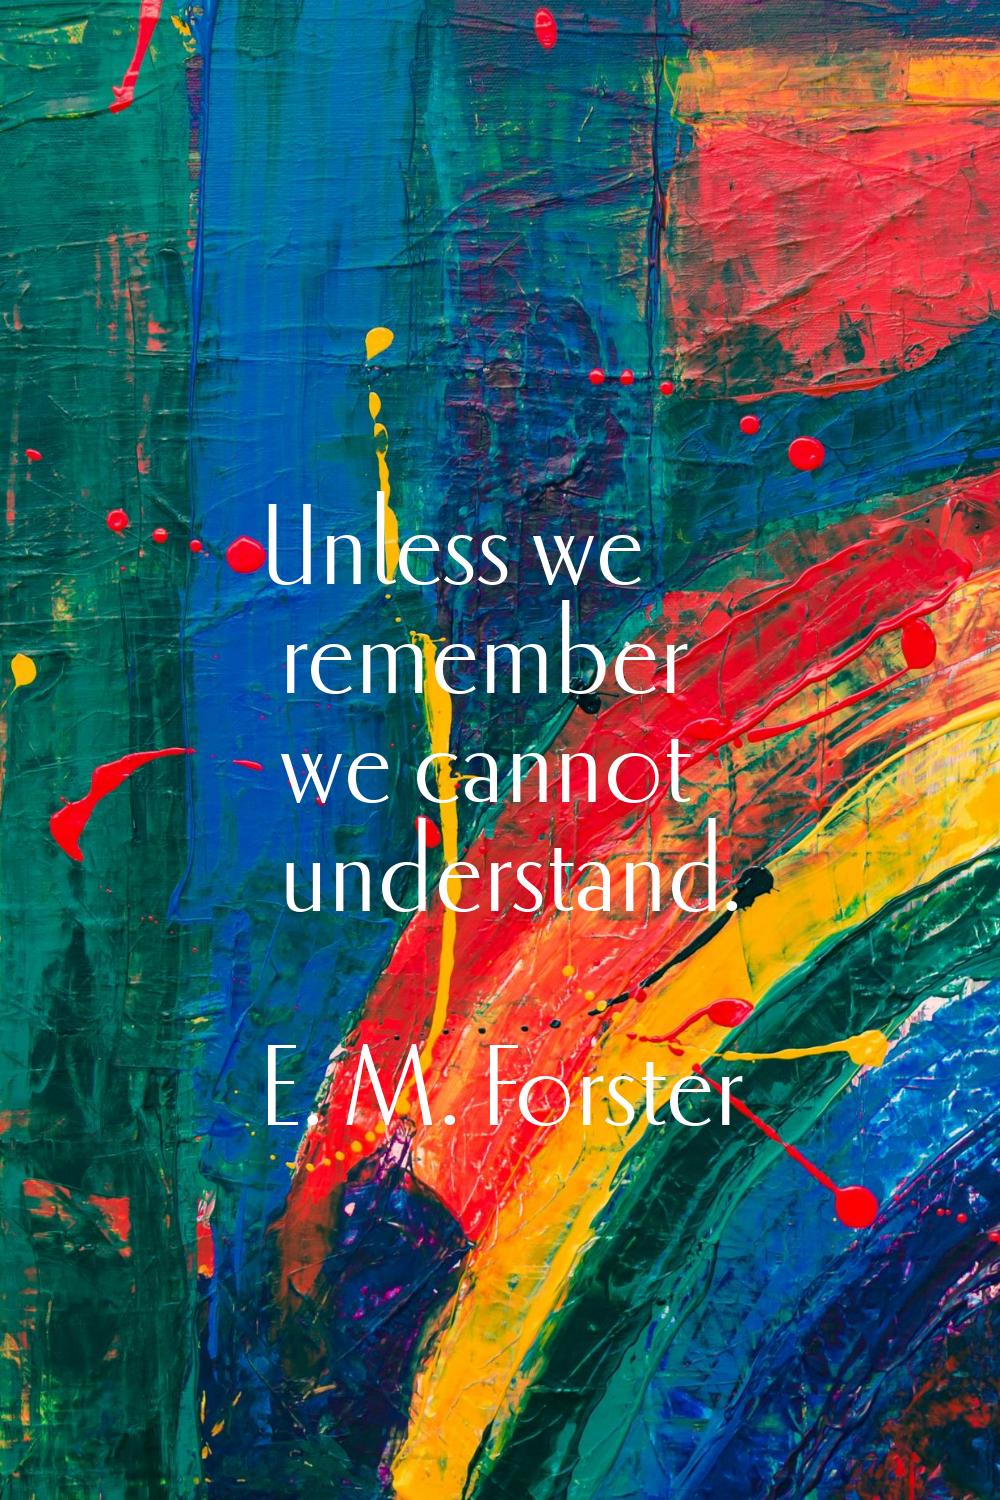 Unless we remember we cannot understand.